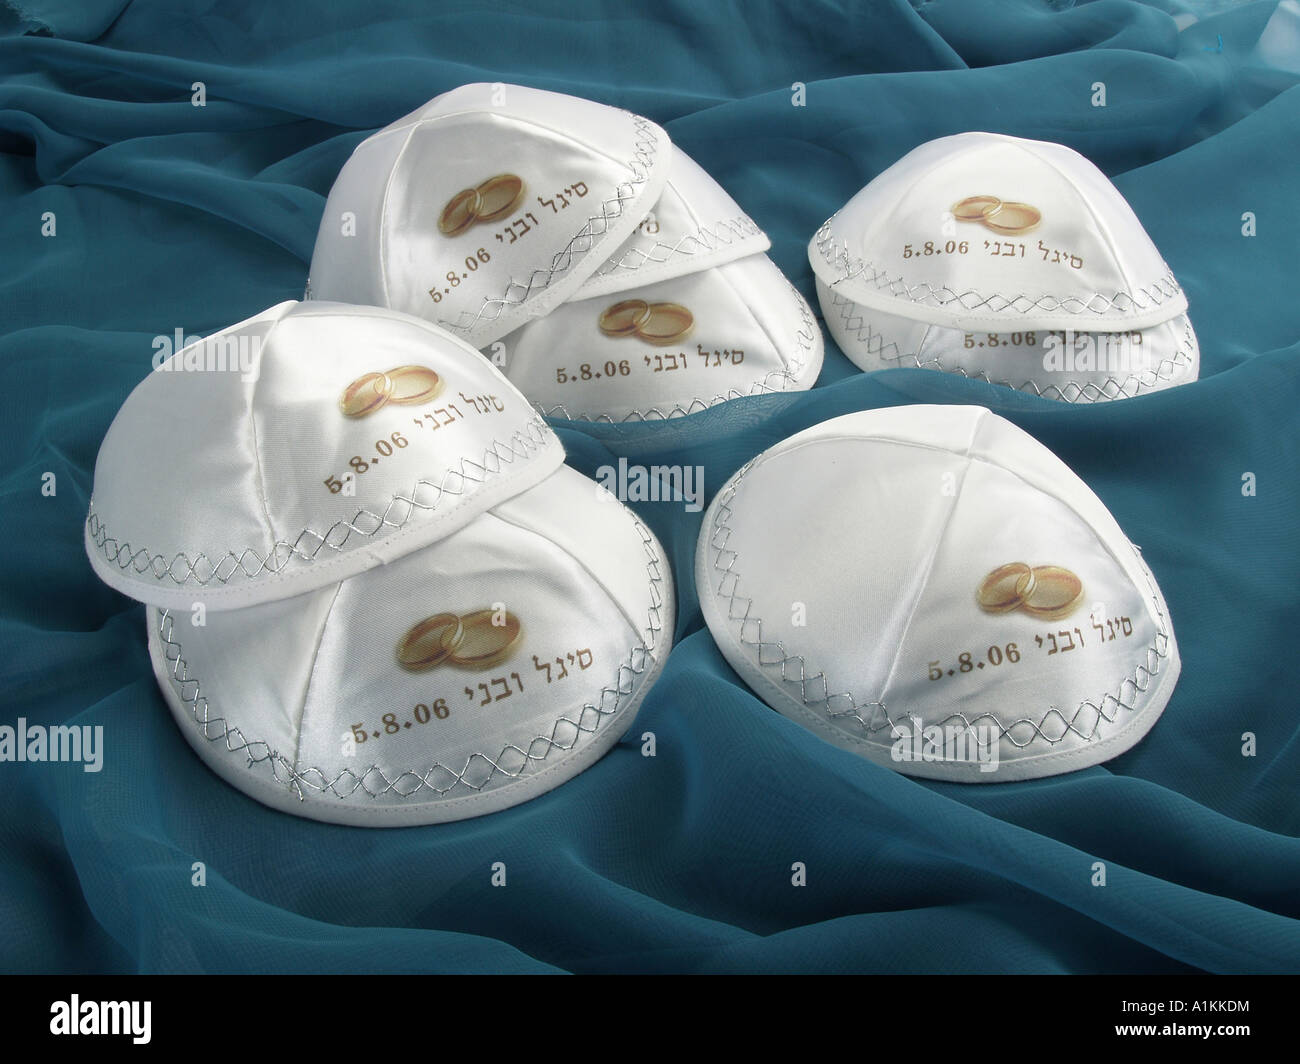 Jewish kipoth skullcaps with text in gold on fabric background Stock Photo